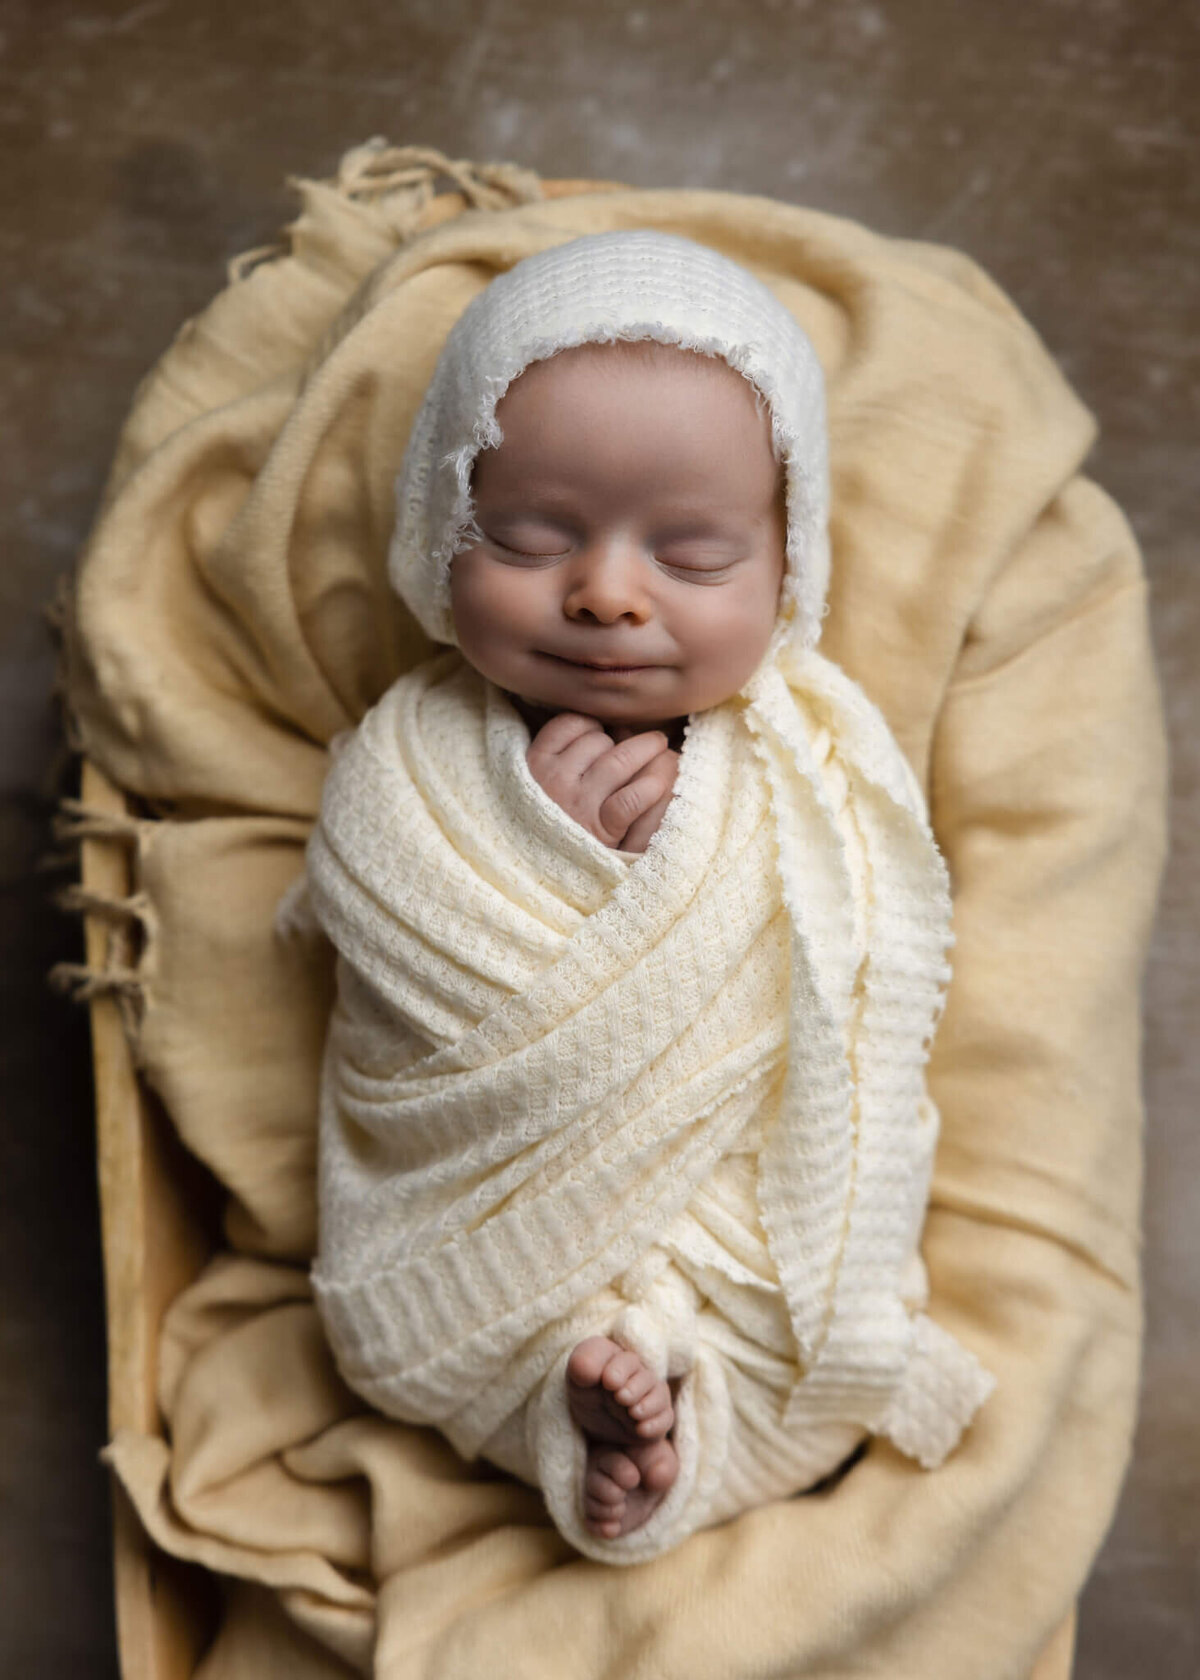 newborn baby wrapped in cream fabric and wearing a cream bonnet alseep in wooden bowl